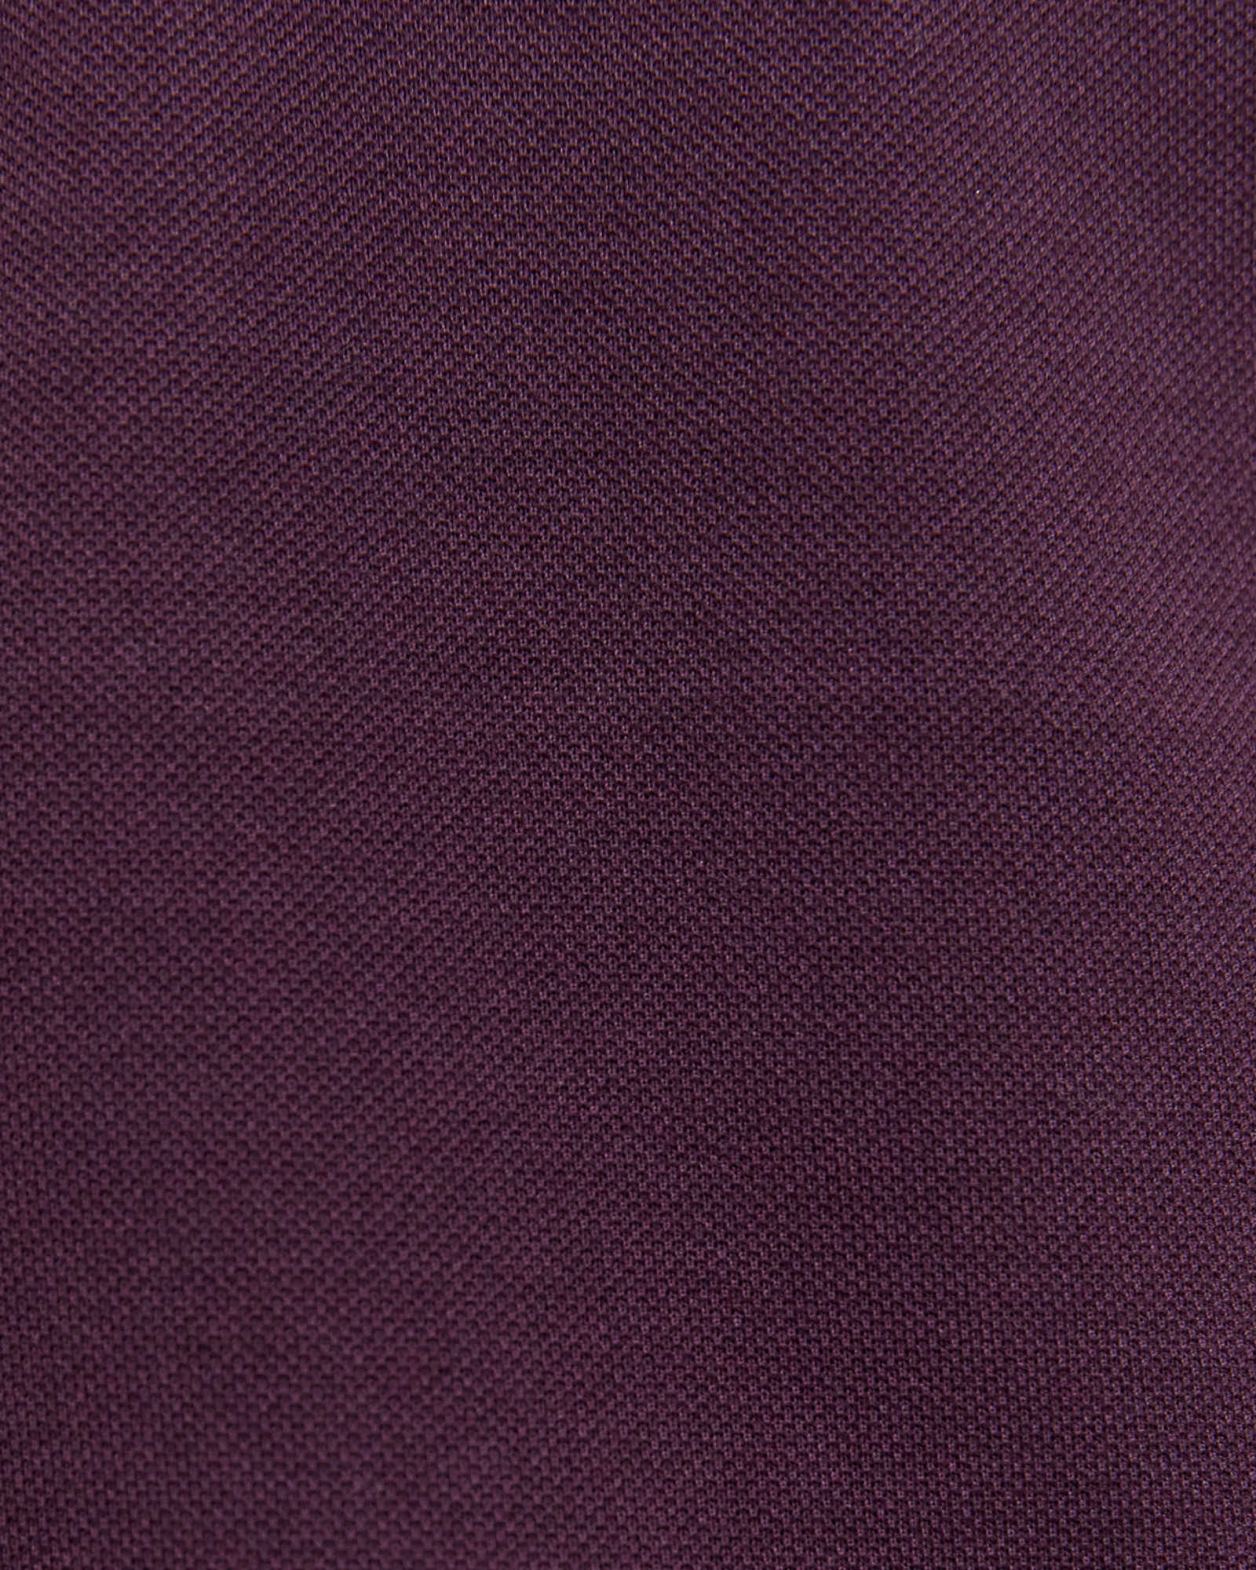 Andy Polo in PLUM